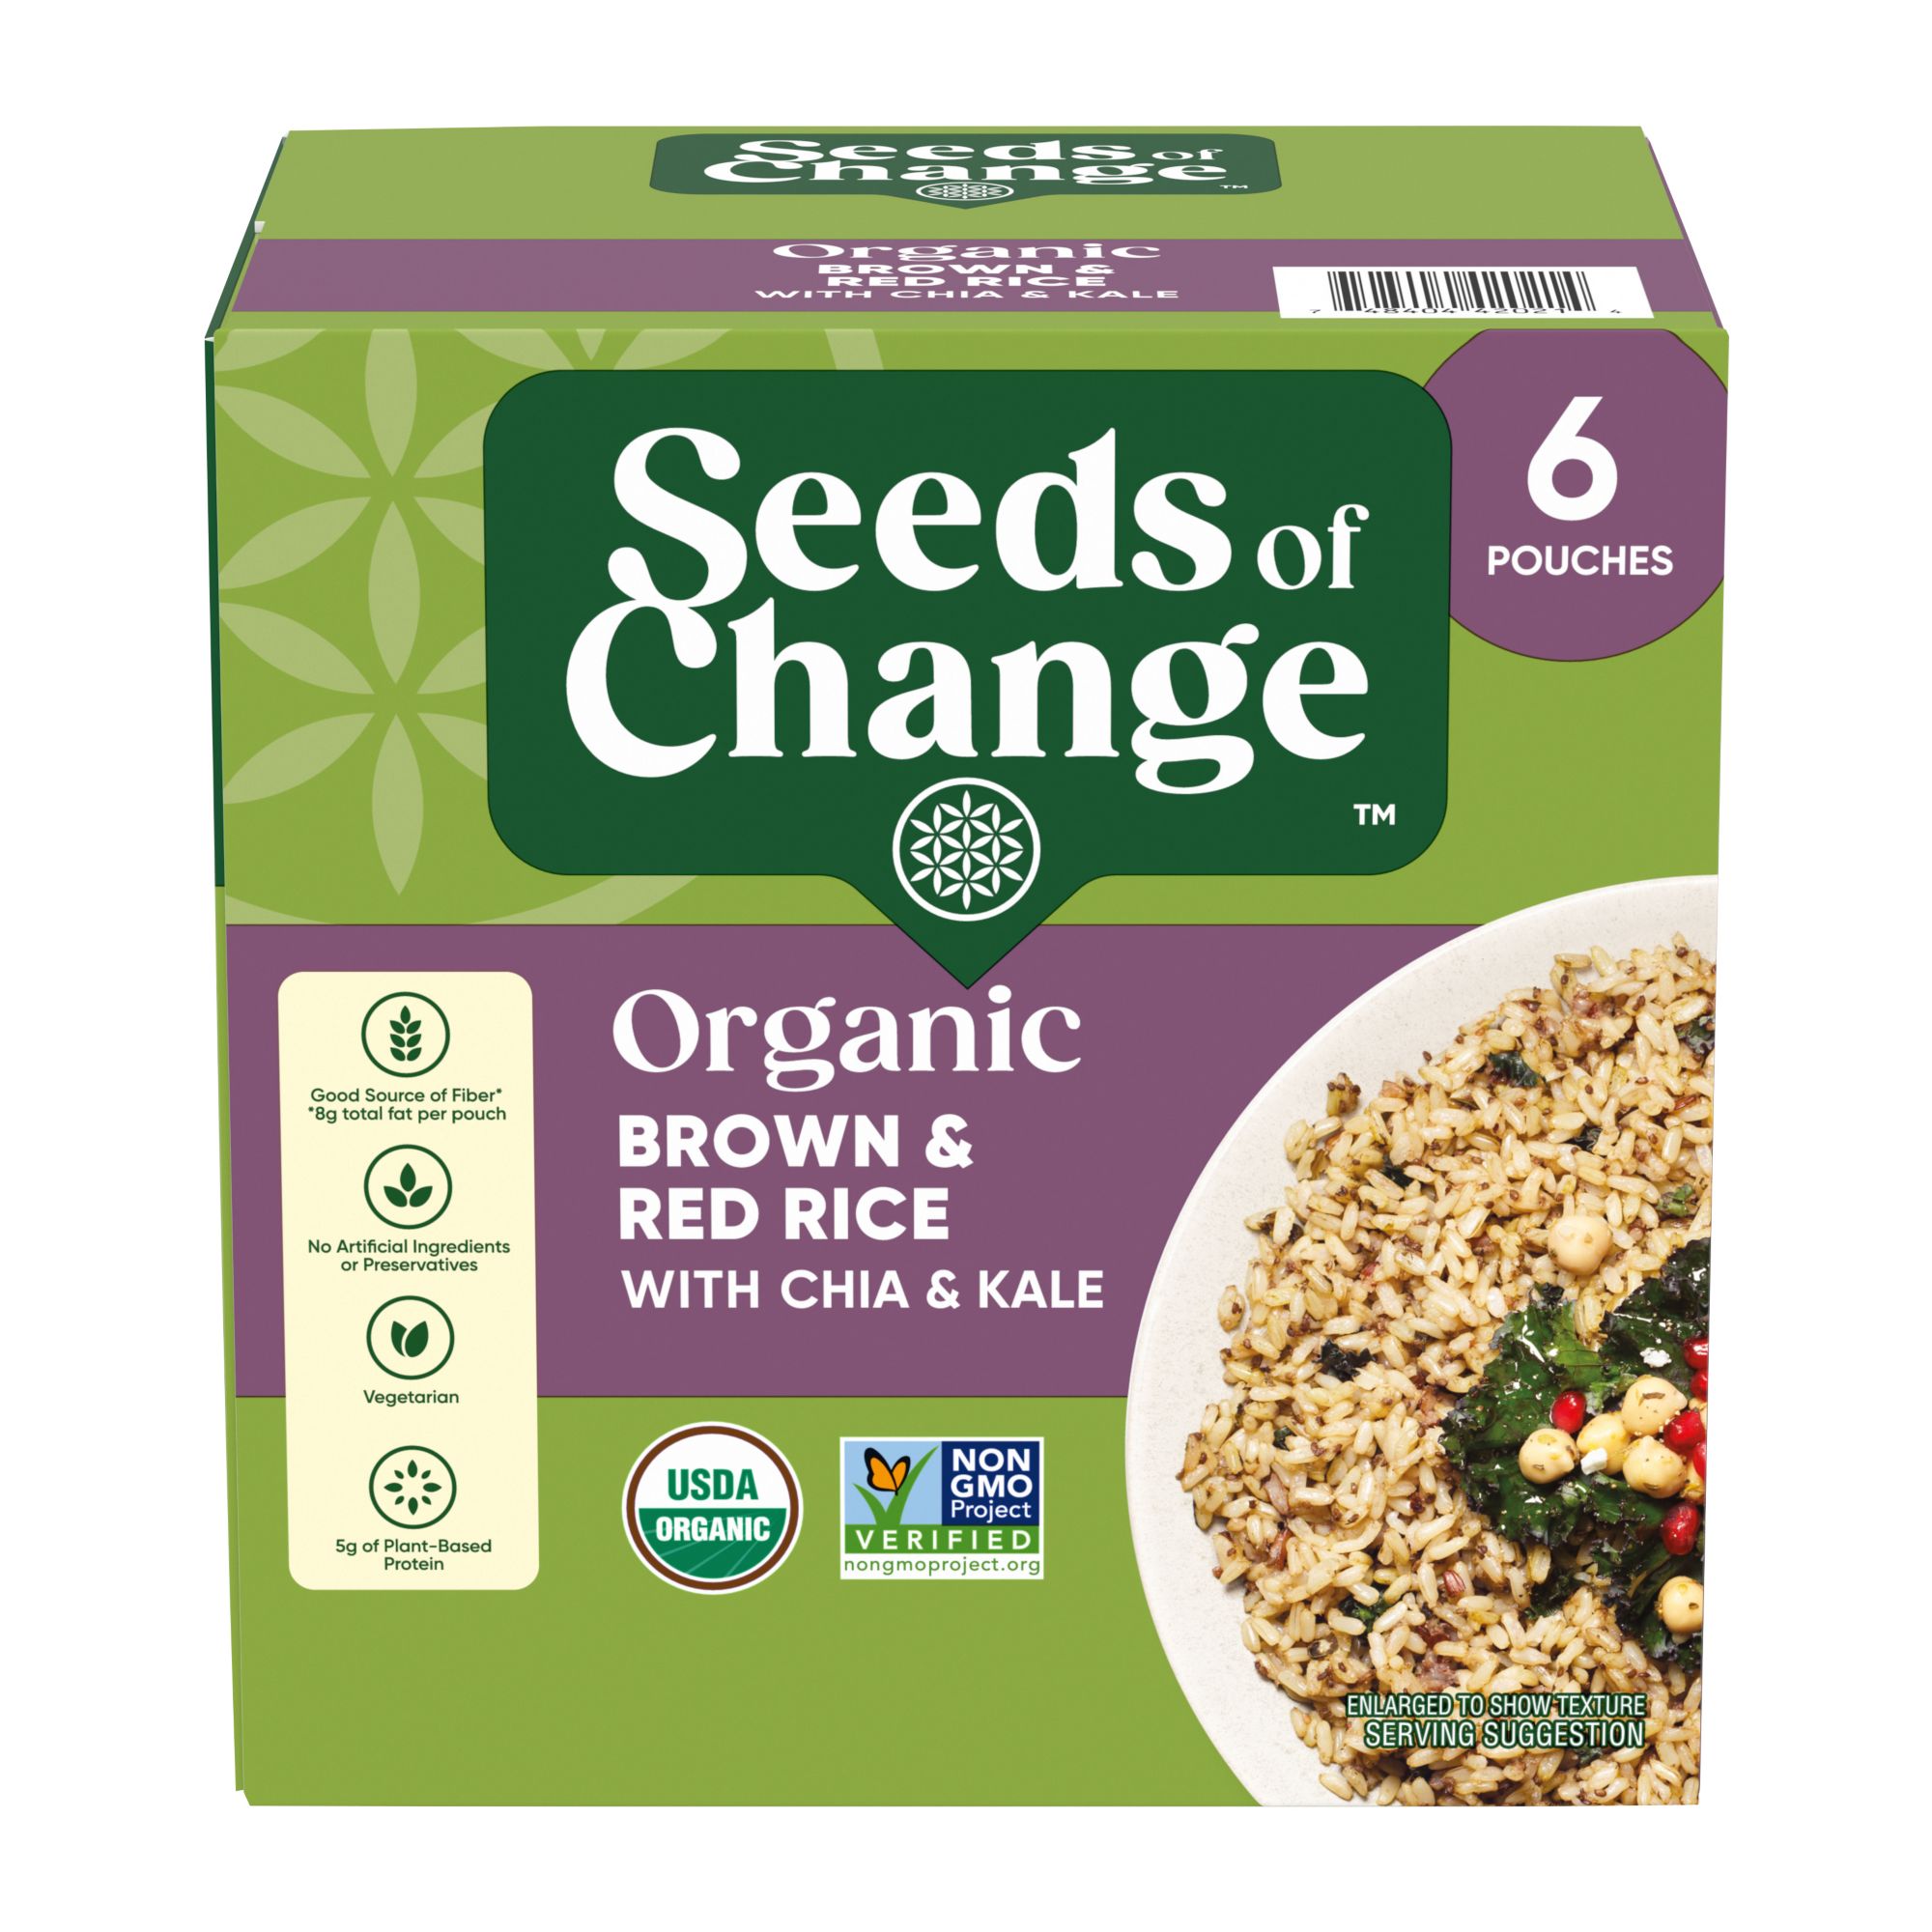 Seeds of Change Certified Organic Brown & Red Rice with Chia & Kale, 6 pk./8.5 oz.